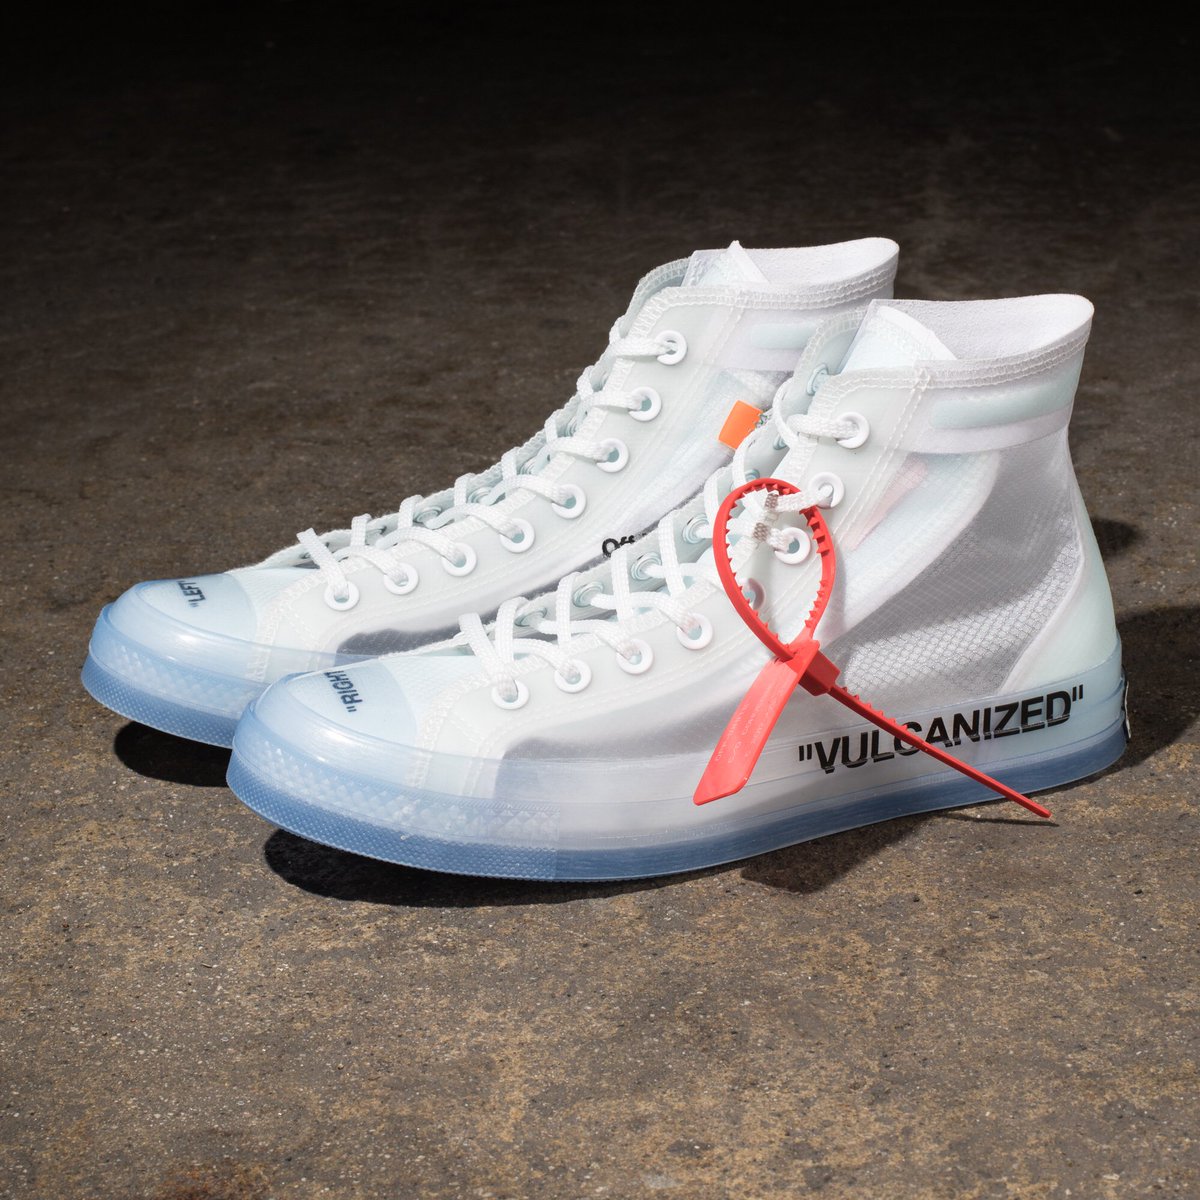 Udstyre købmand Korrespondent UNDEFEATED on Twitter: "See the Converse x Off White “The Ten” Chuck 70  Raffle Information on our Instagram now https://t.co/HzaFUPgrIZ  https://t.co/l3RXezbO1P" / X